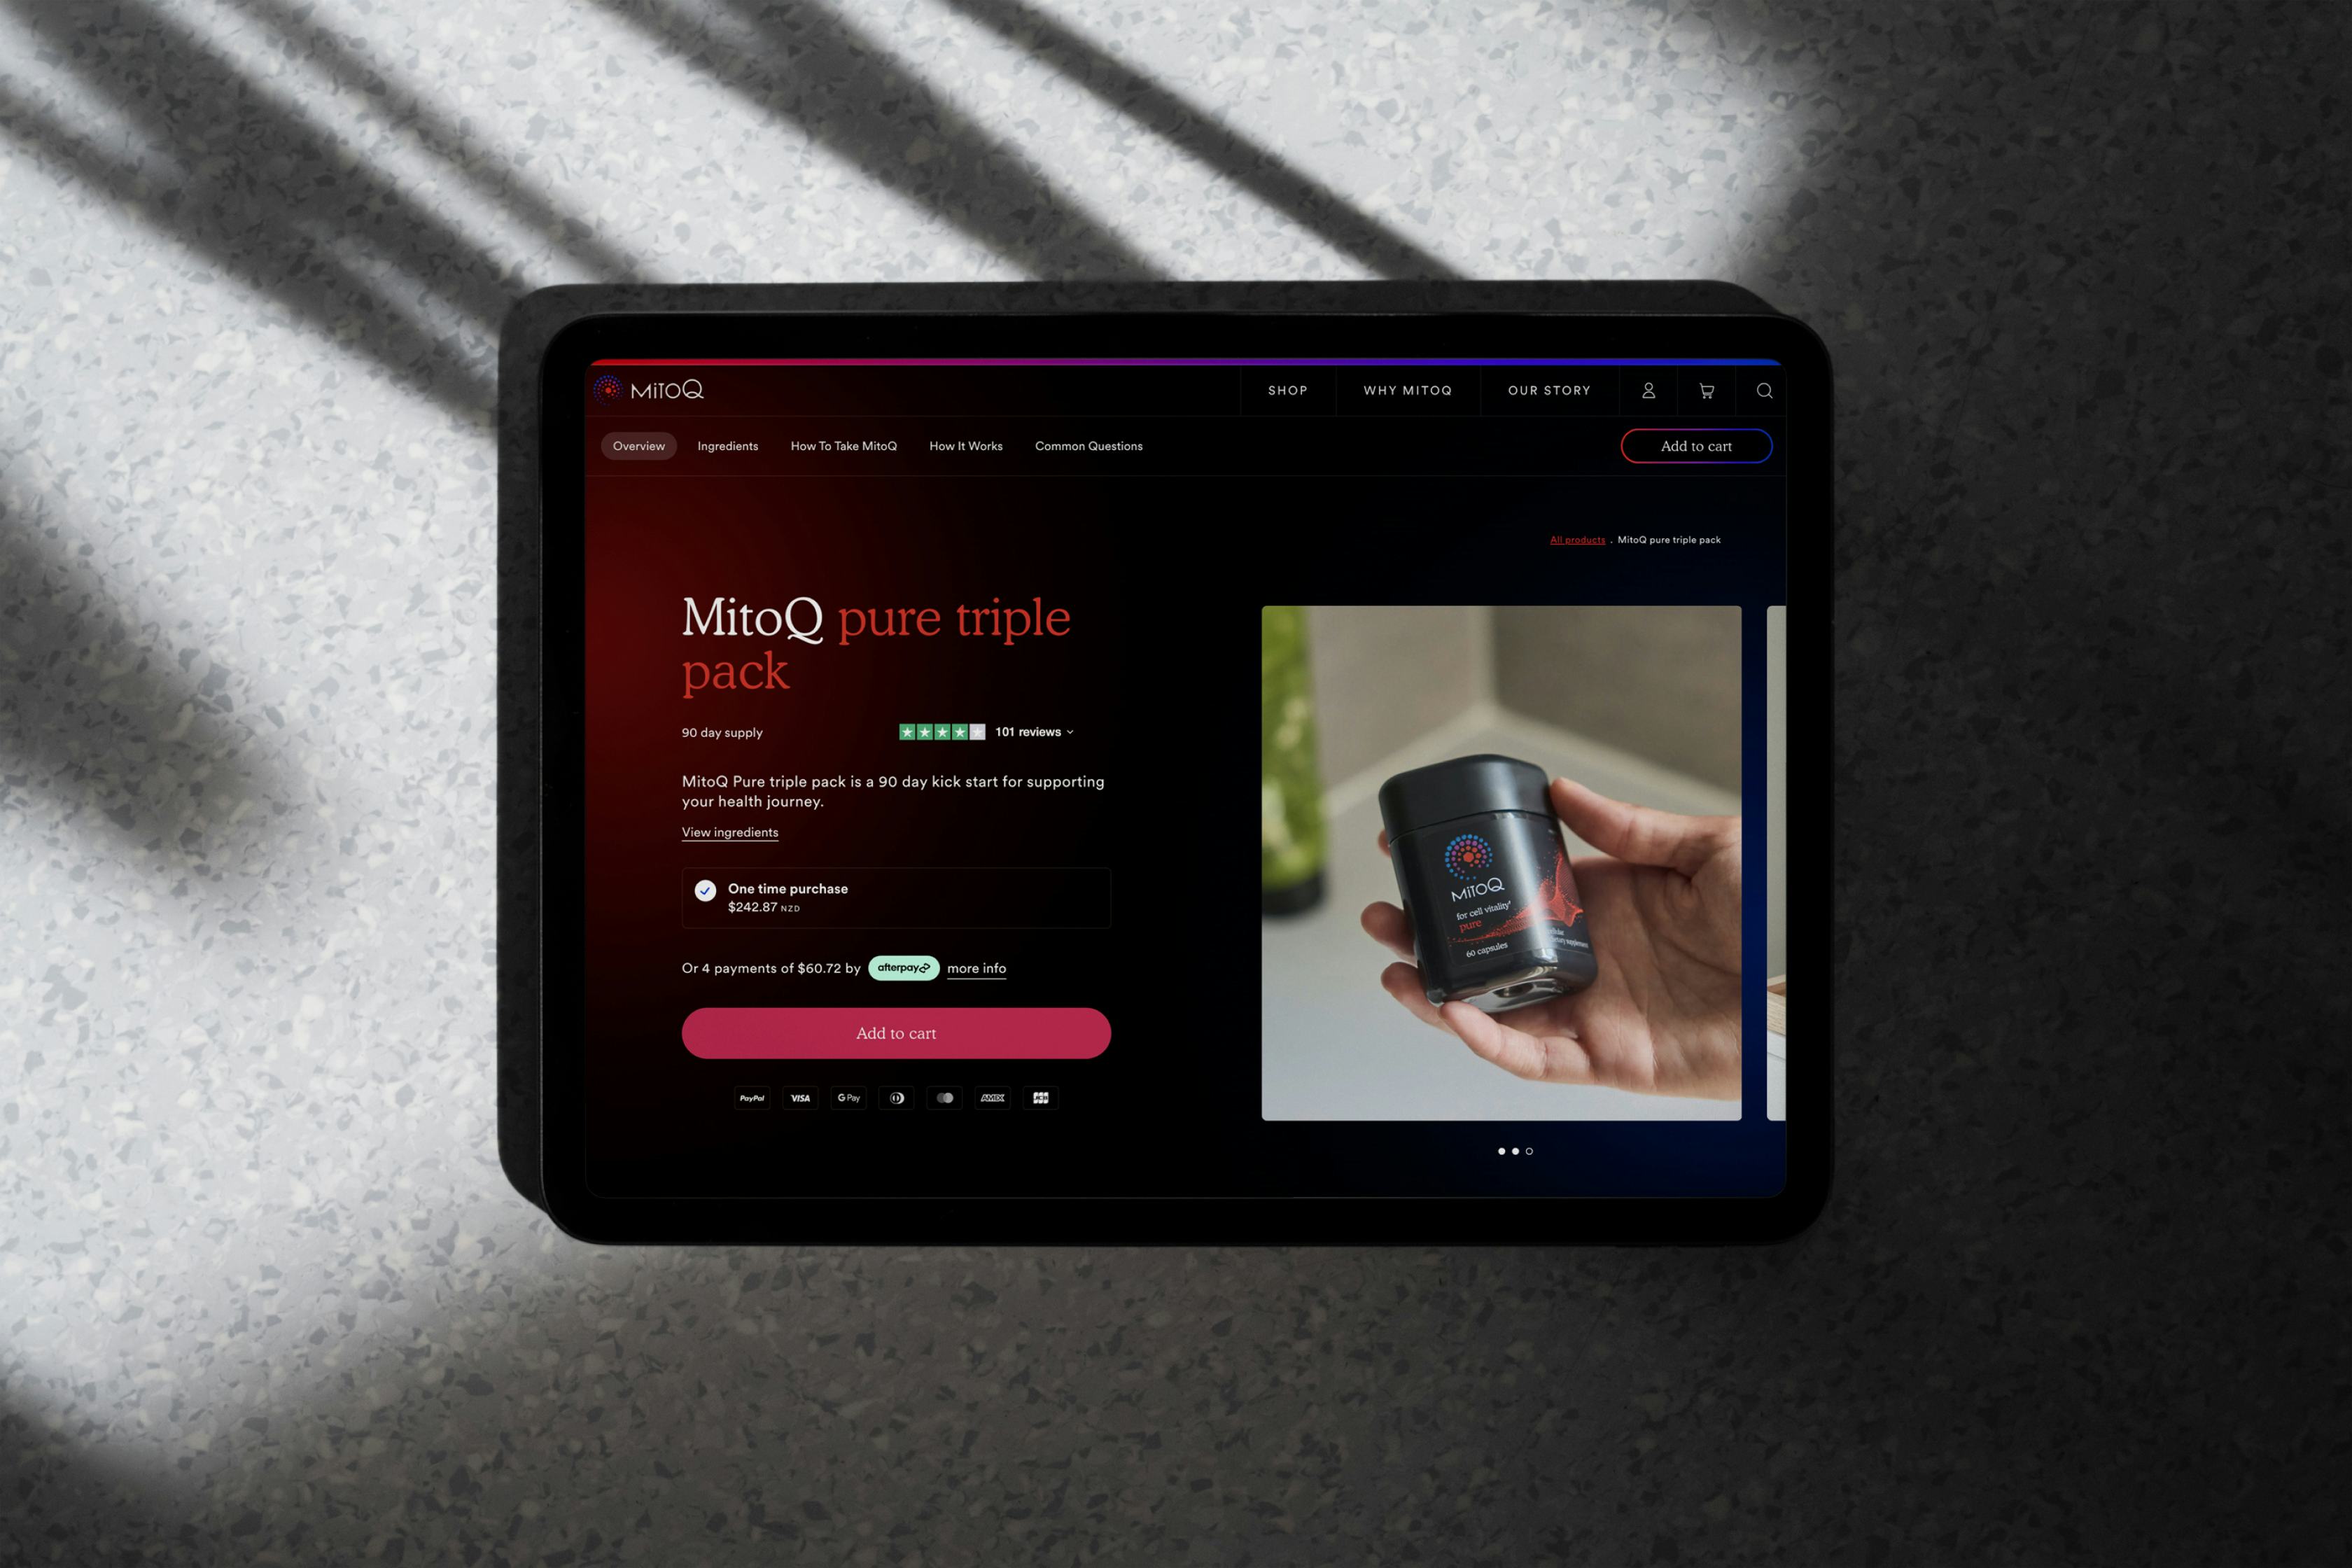 Image of MitoQ website showing on an iPad